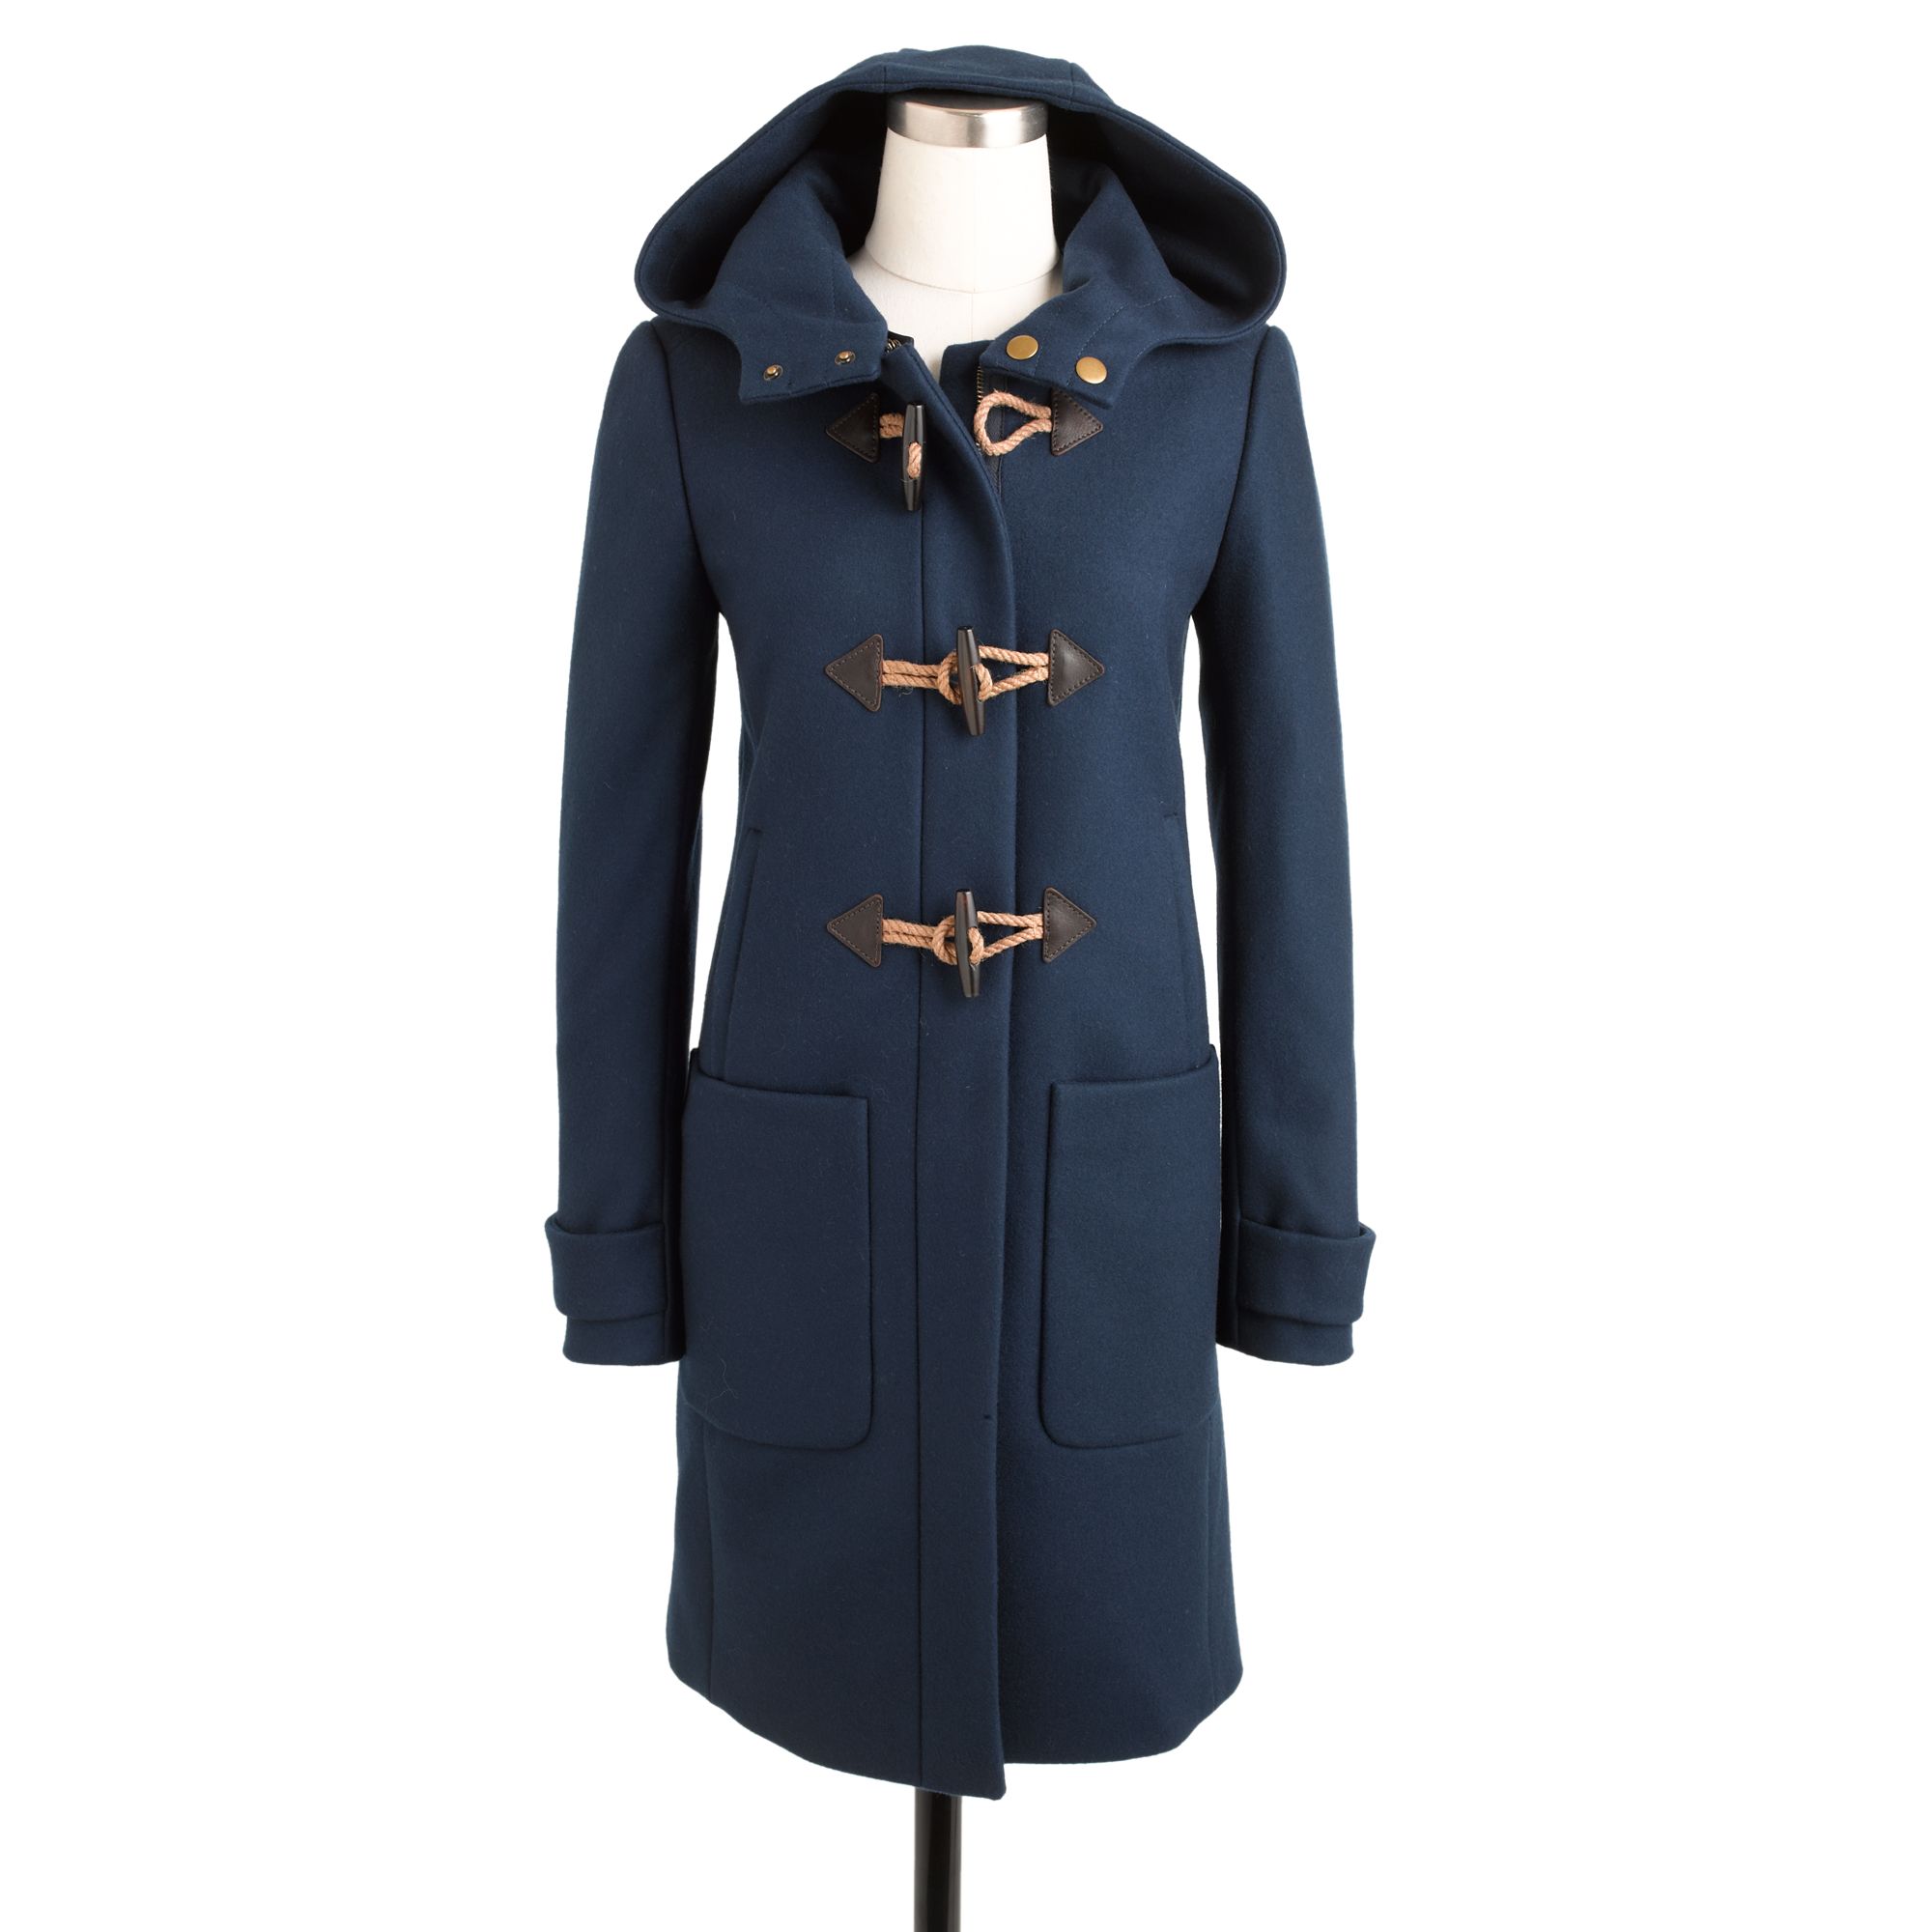 J.crew Convertible Toggle Coat in Blue | Lyst